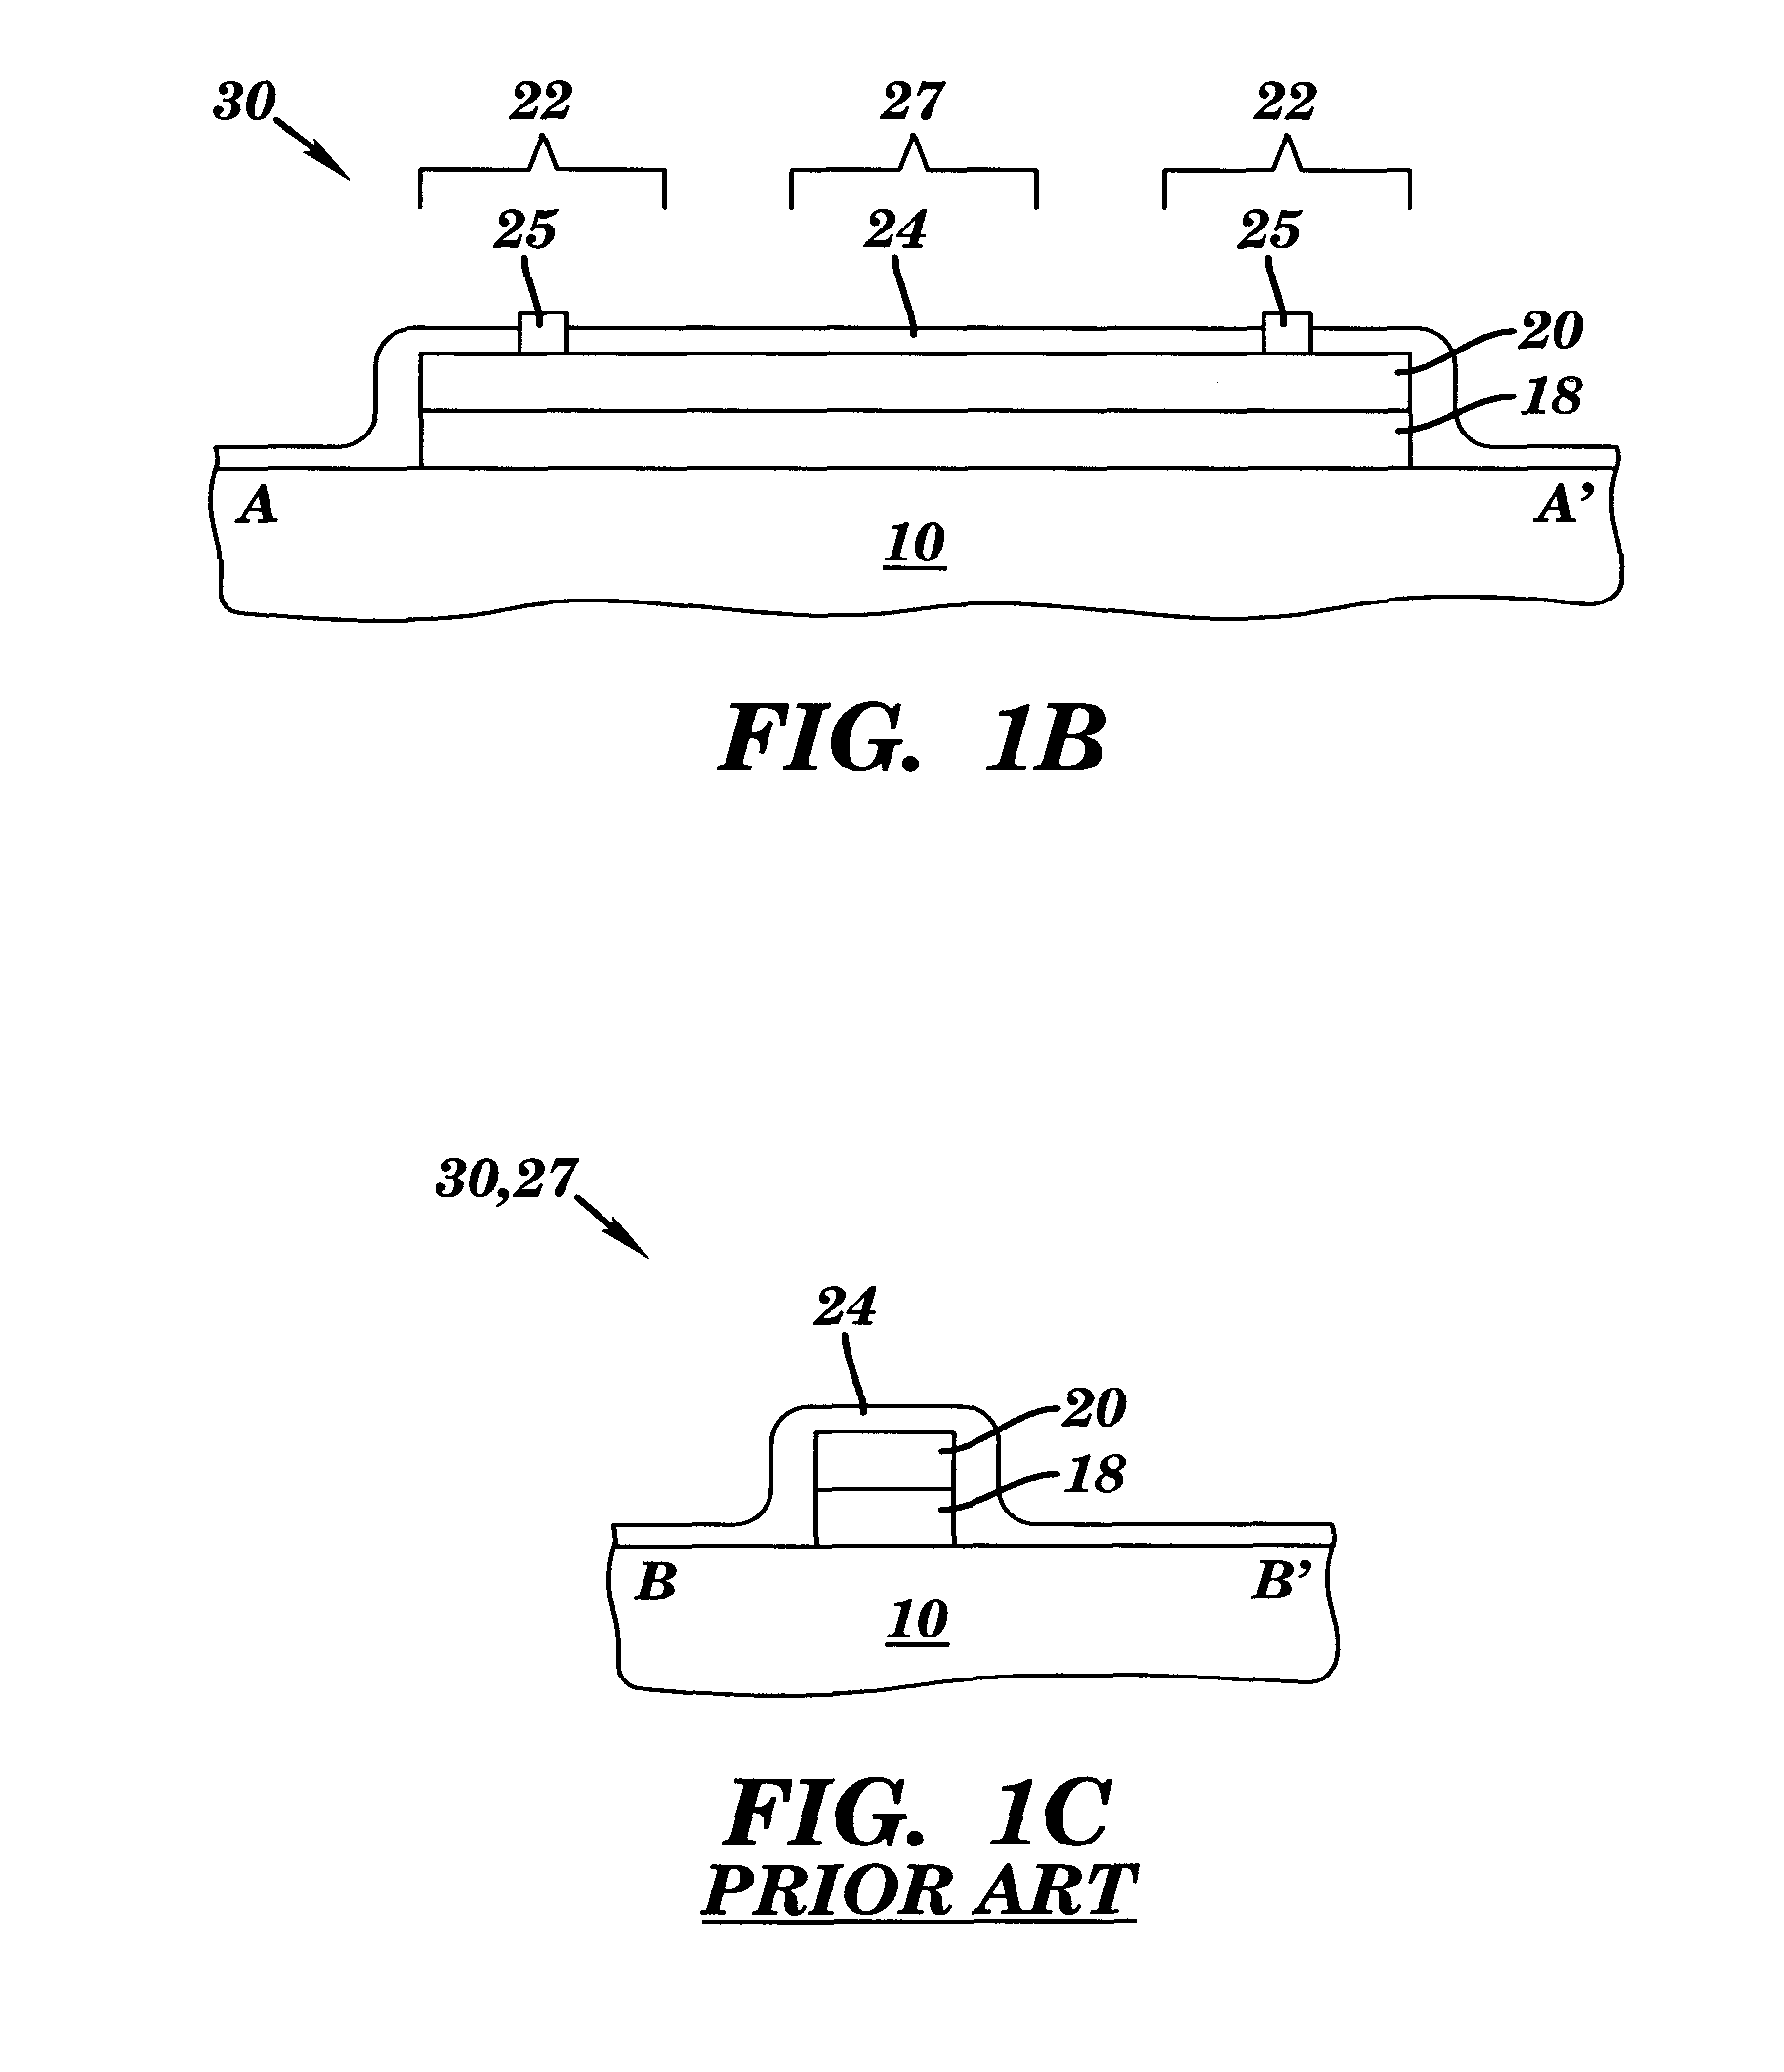 eFuse with partial SiGe layer and design structure therefor